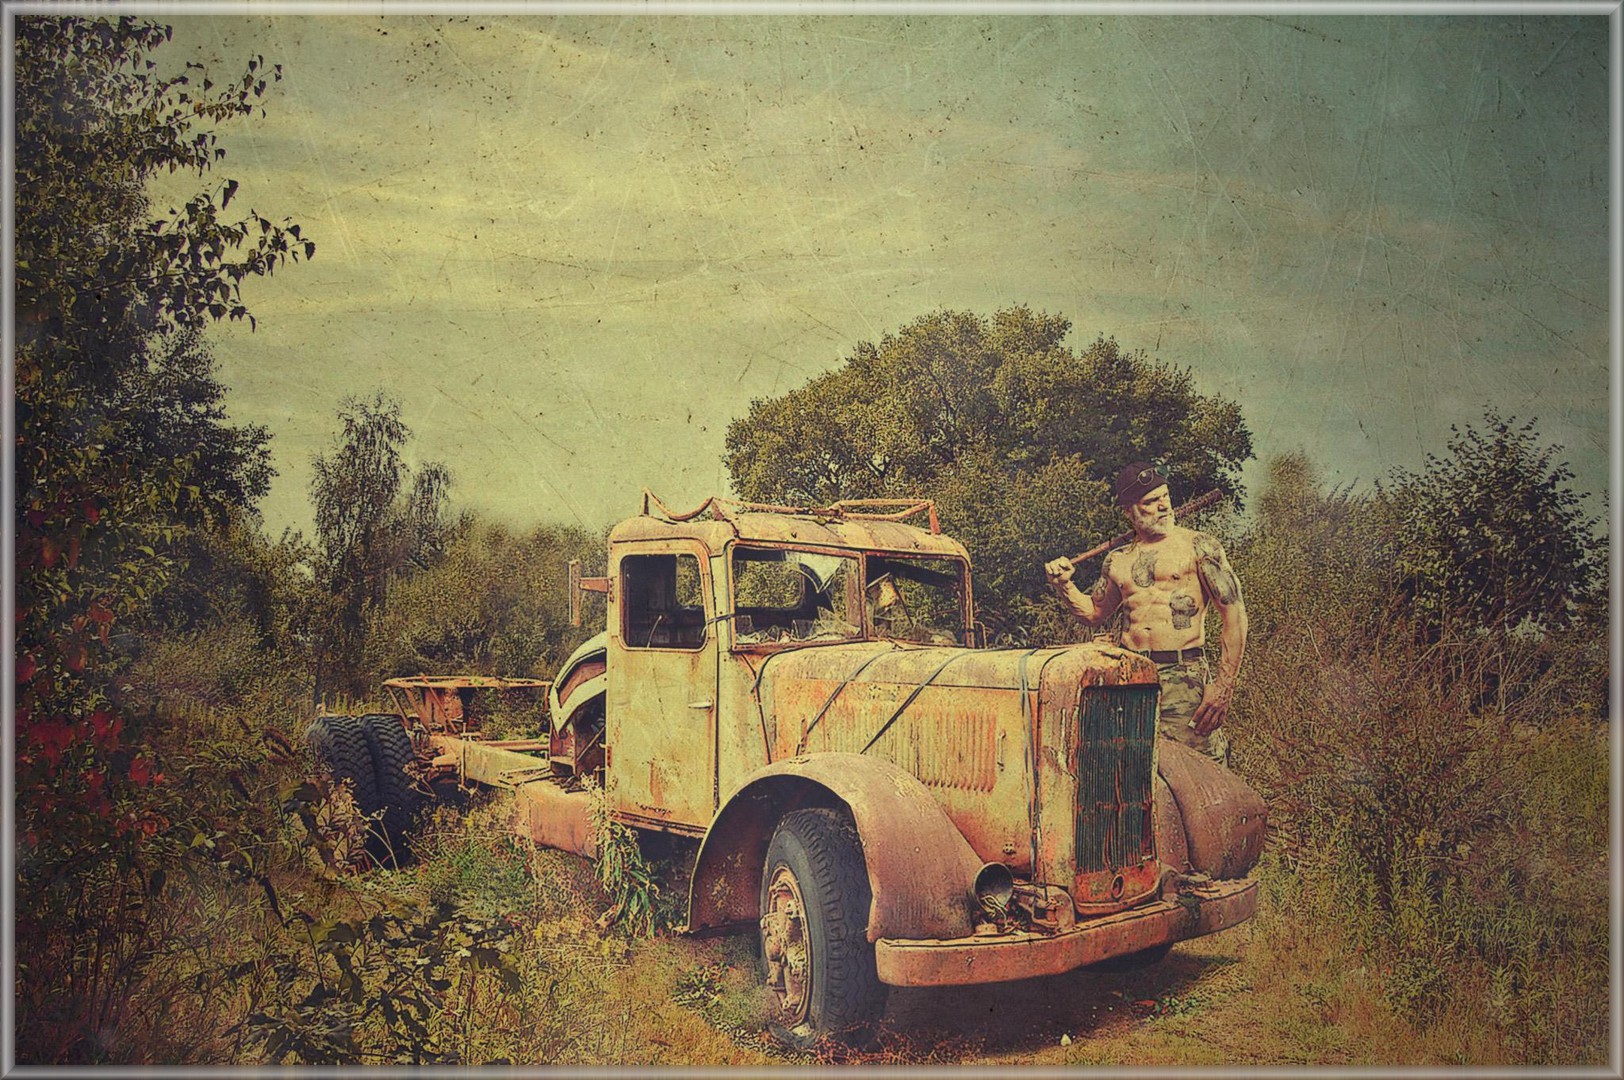 Old Truck